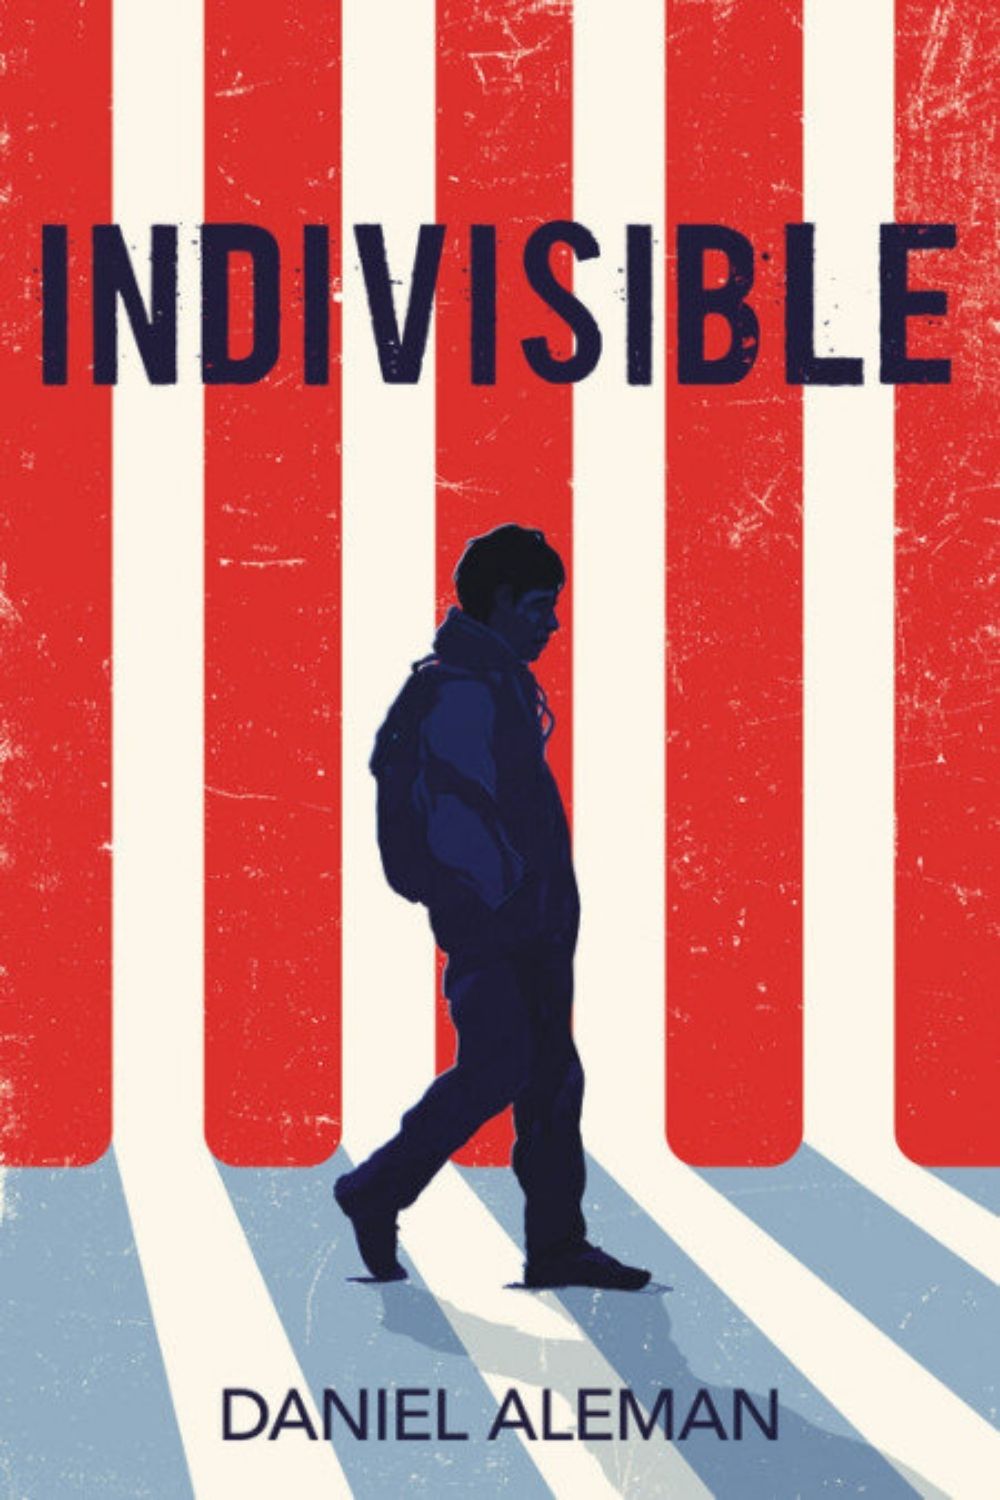 8 Debut Novels Releasing In May 2021 You Should Read (Indivisible)